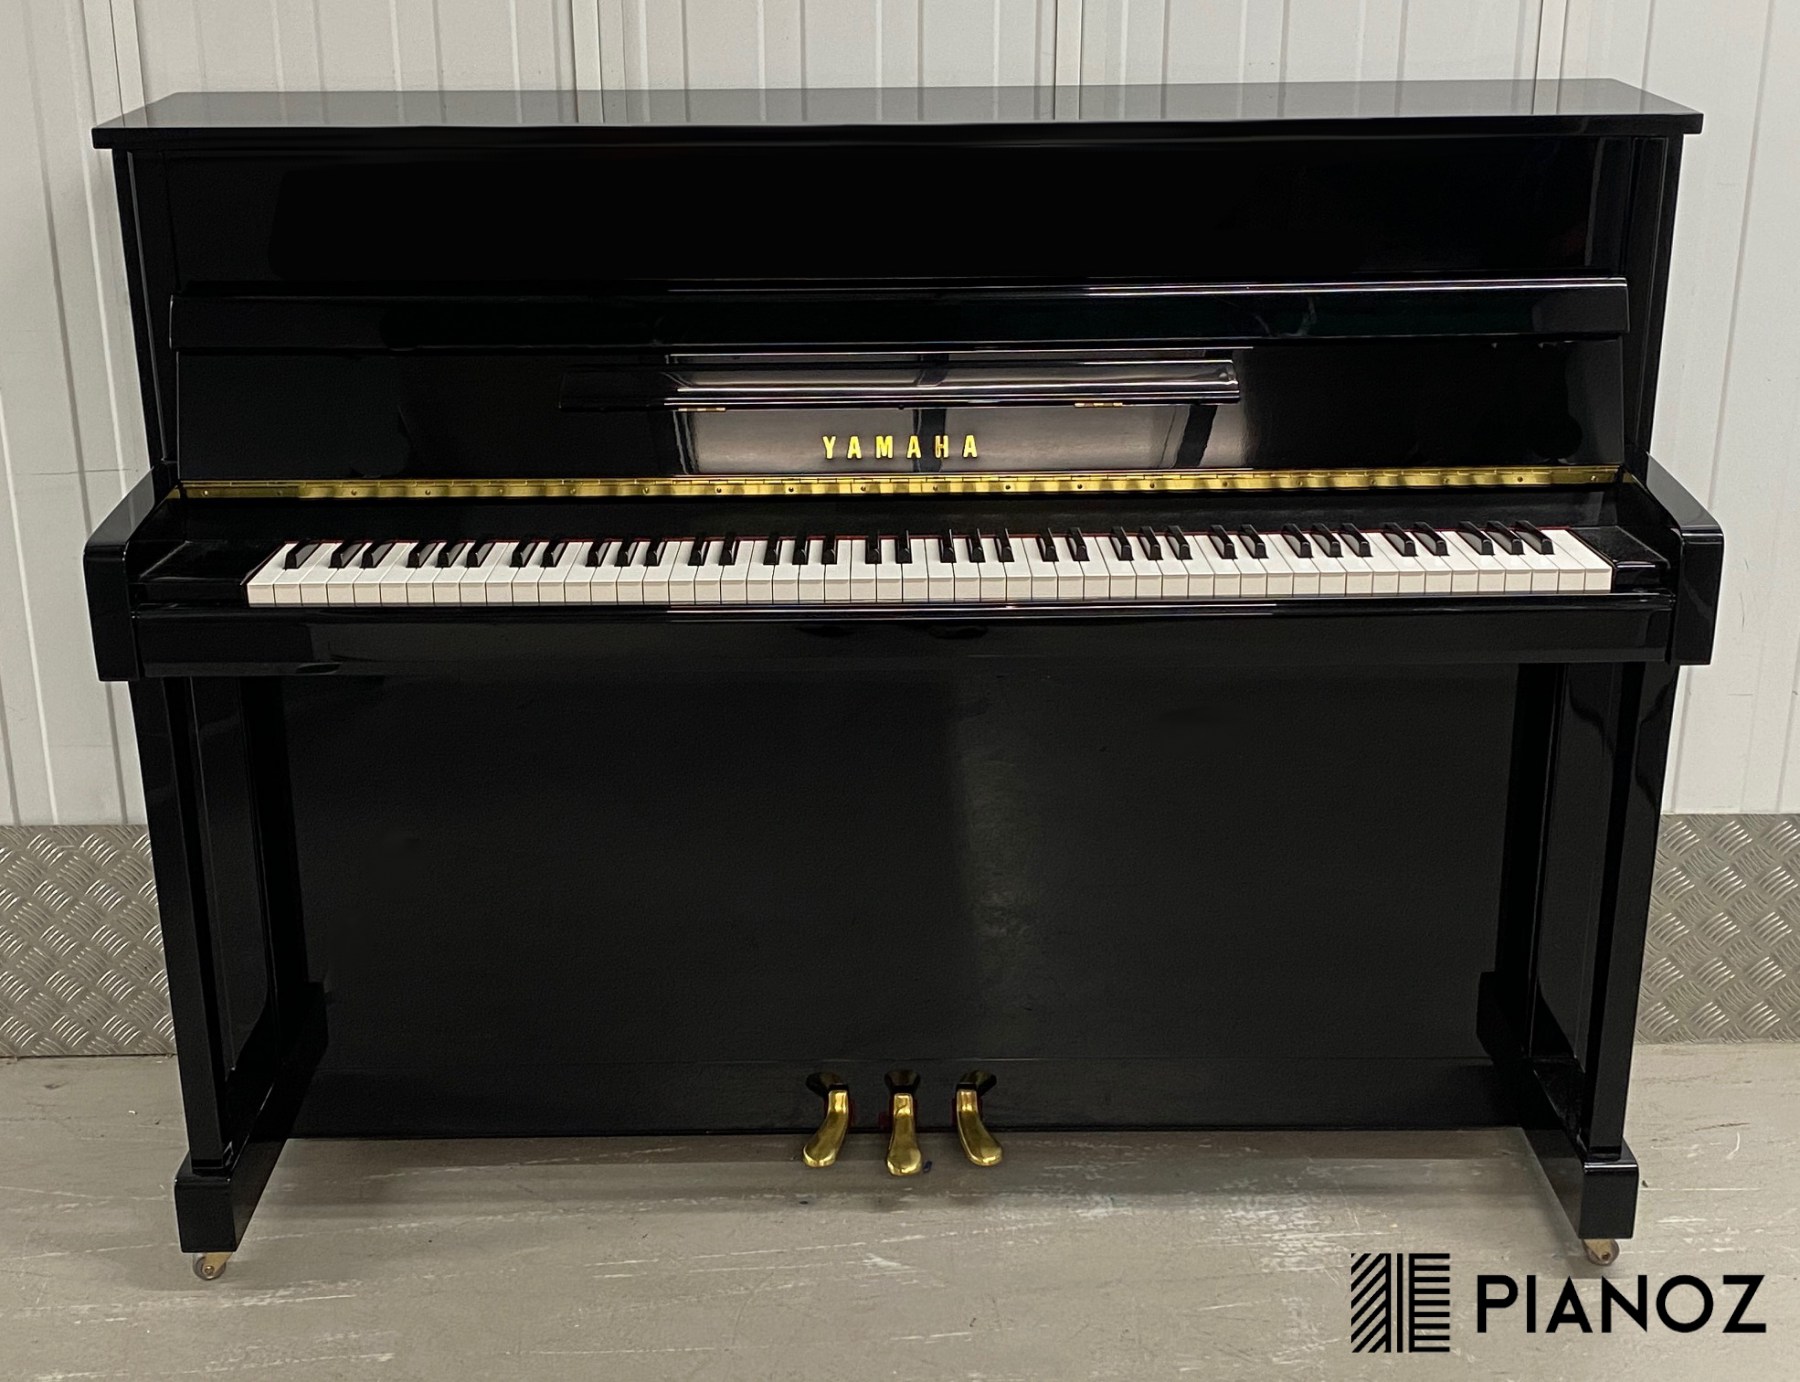 Yamaha B2 Upright Piano piano for sale in UK